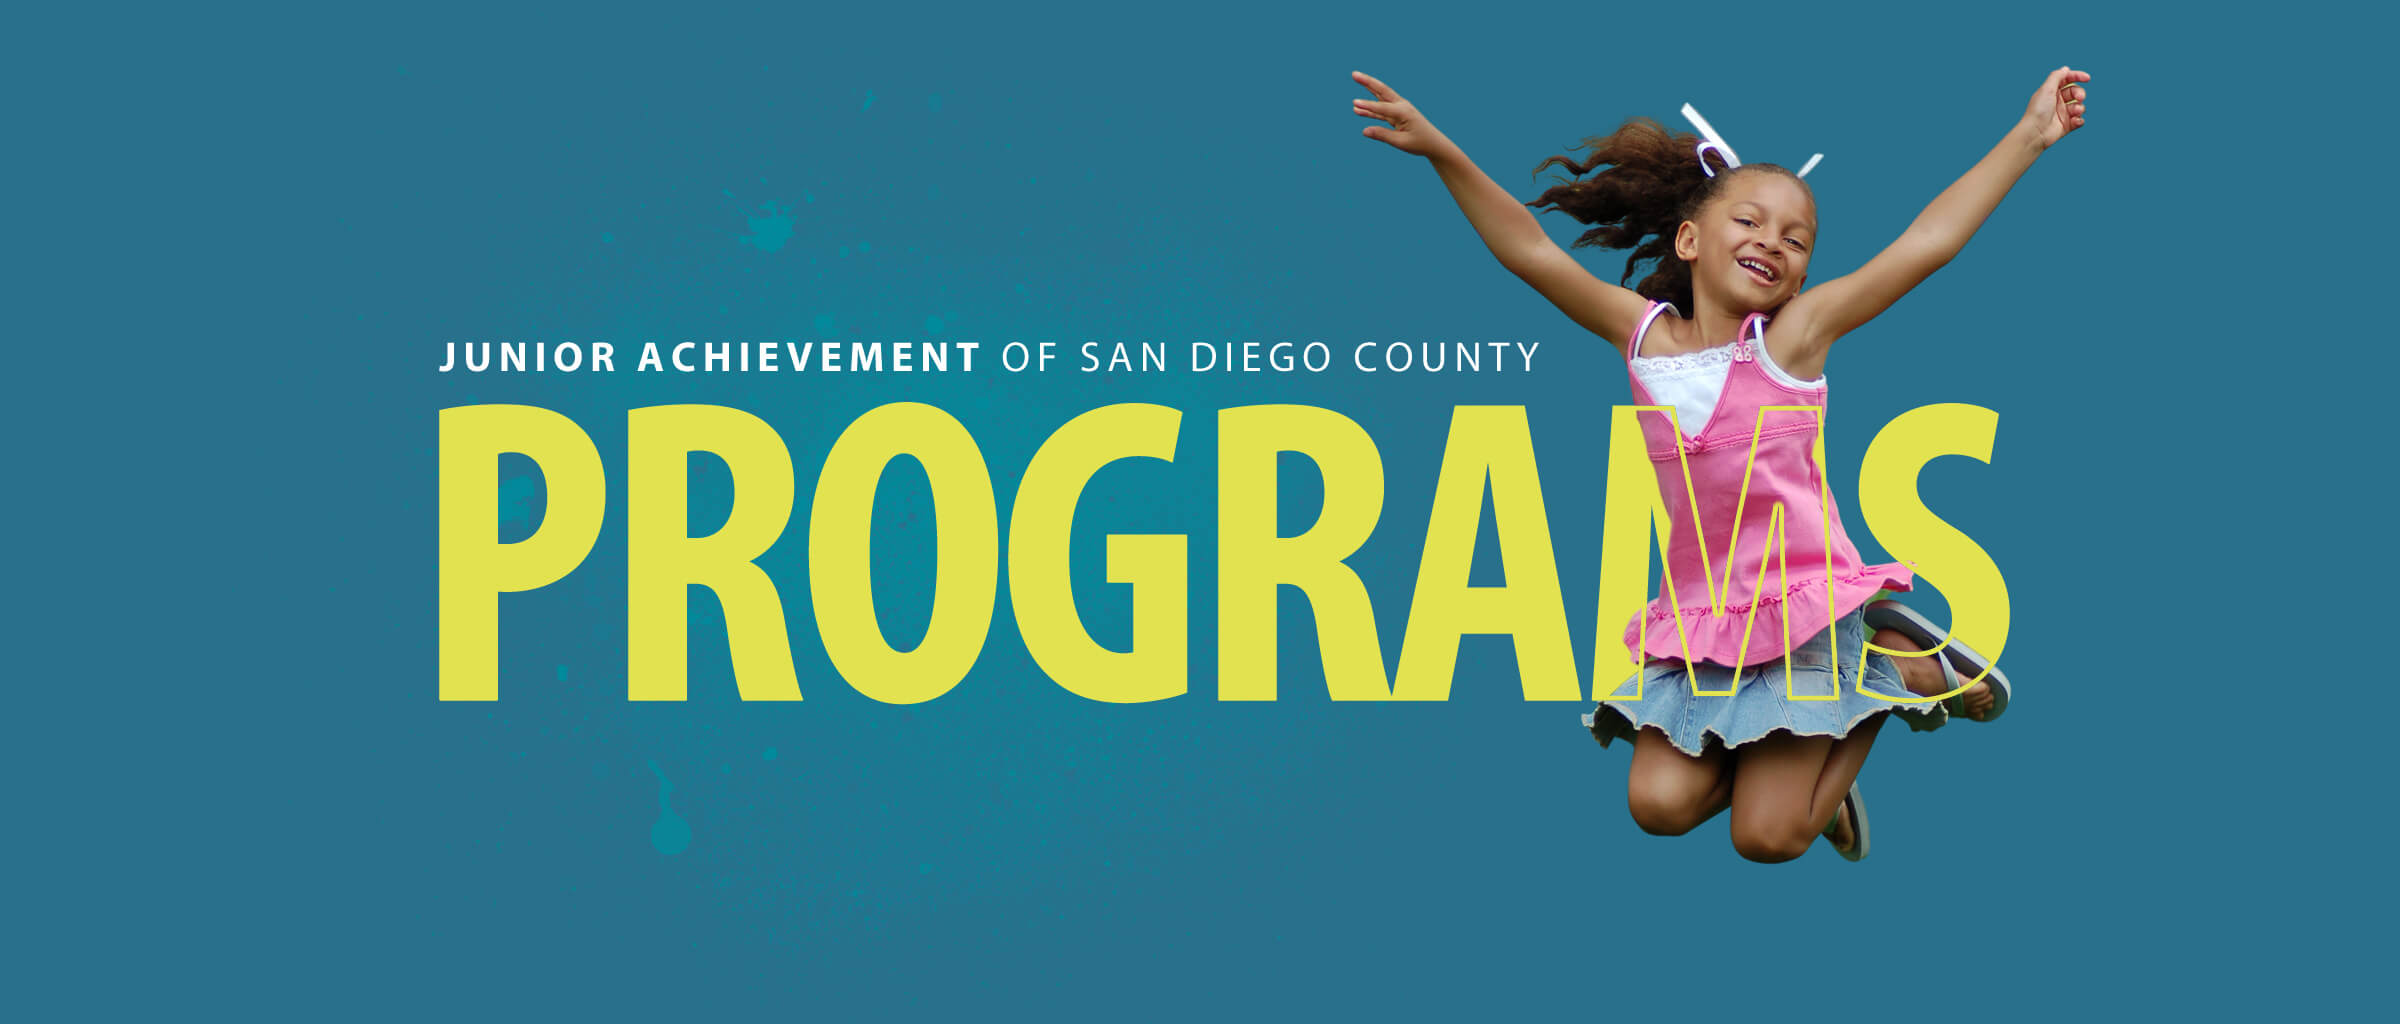 JA Programs header with little girl jumping and smiling